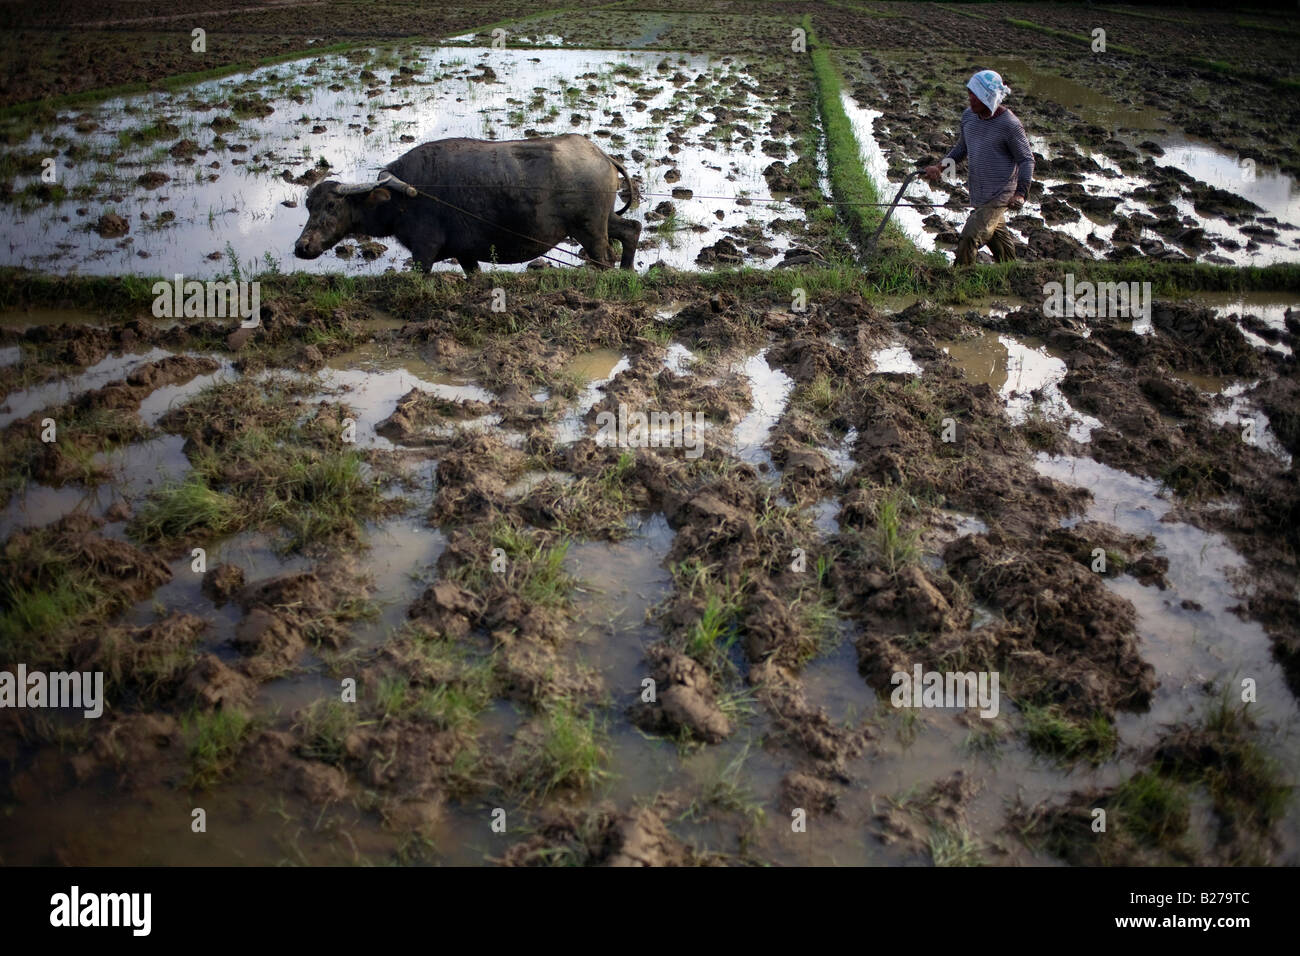 A Filipino worker drives a carabao while tending a rice field near Mansalay, Oriental Mindoro, Philippines. Stock Photo